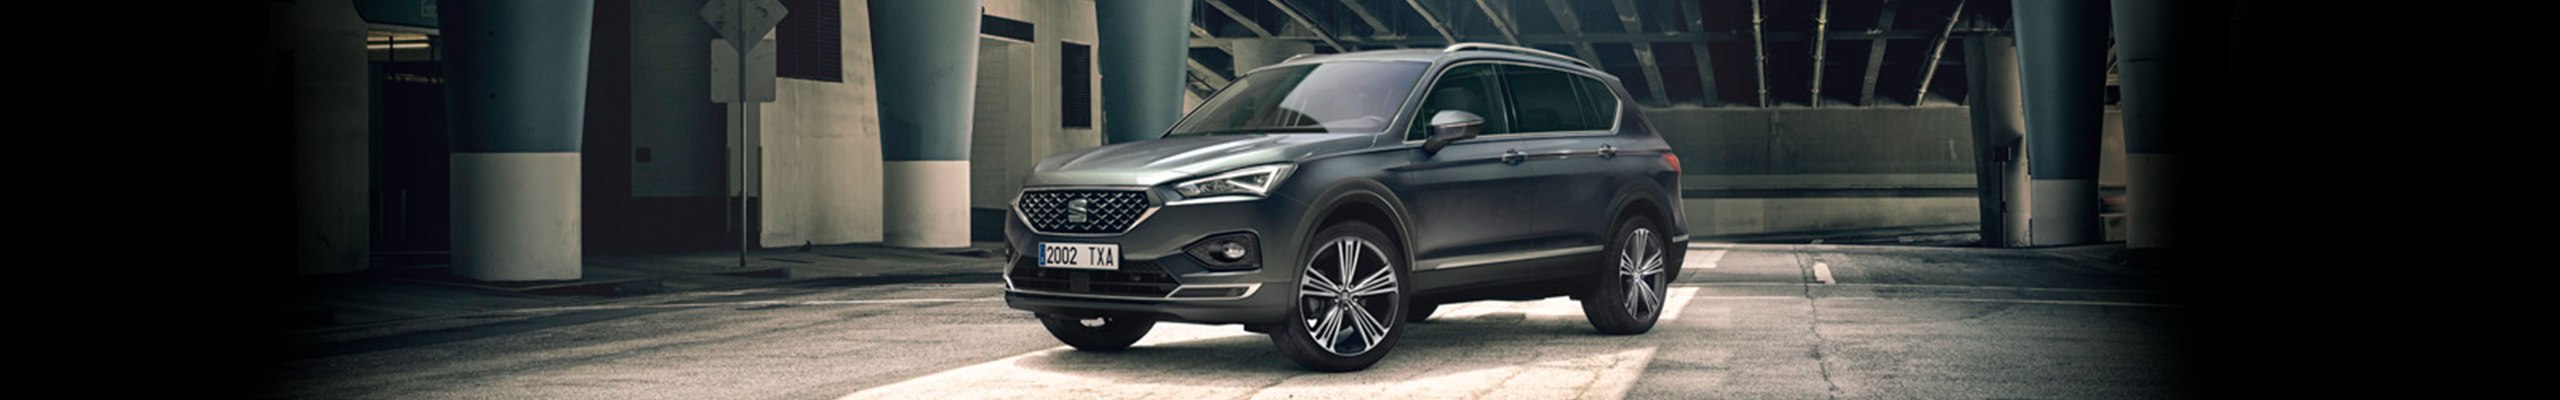 SEAT Tarraco in black colour parked